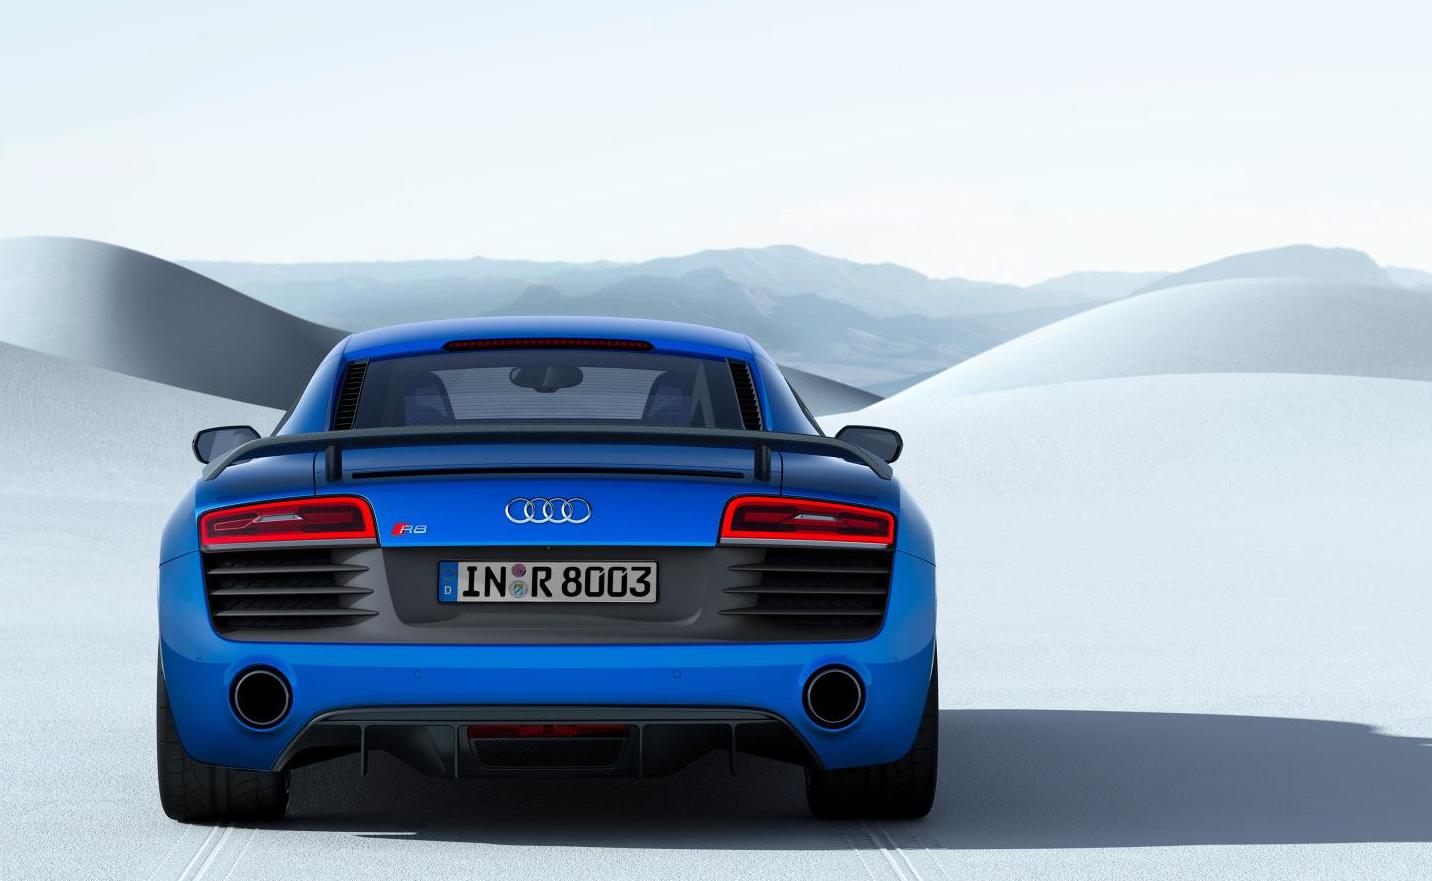 The R8 was one of the first useable day-to-day supercars